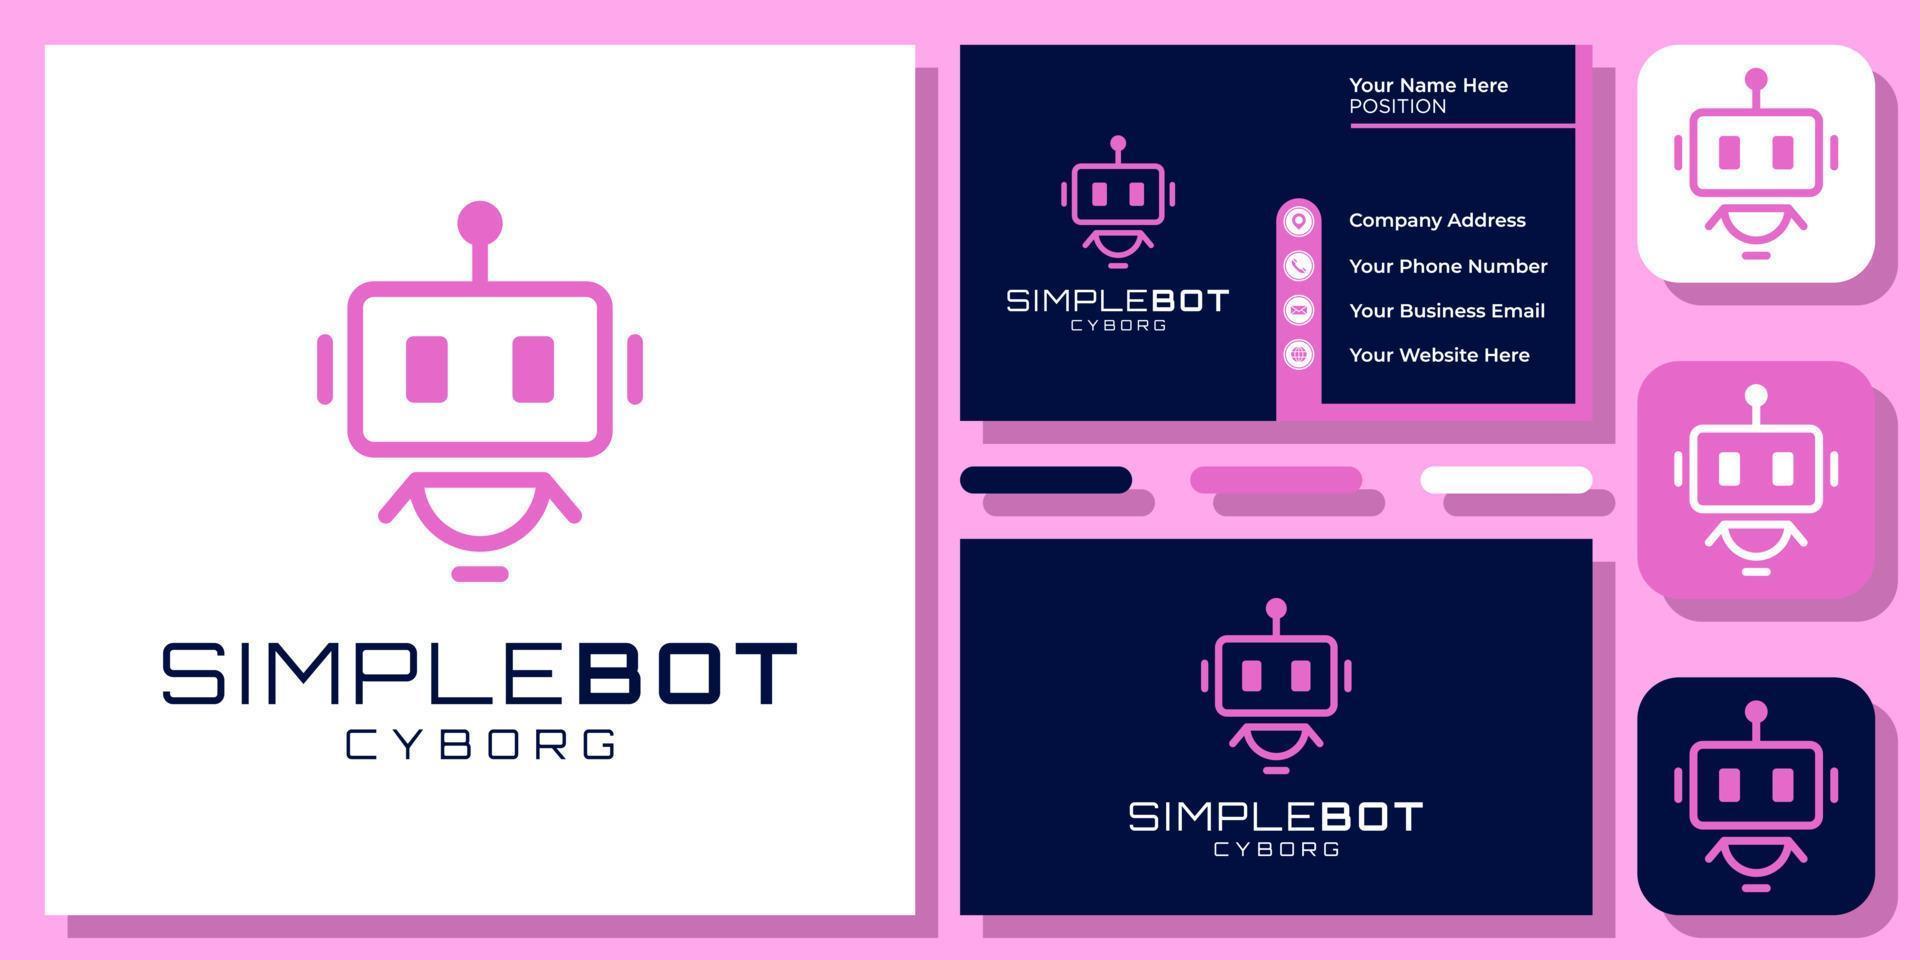 Simple Robot Bot Cyborg Machine Smart Artificial Intelligence Logo Design with Business Card Template vector